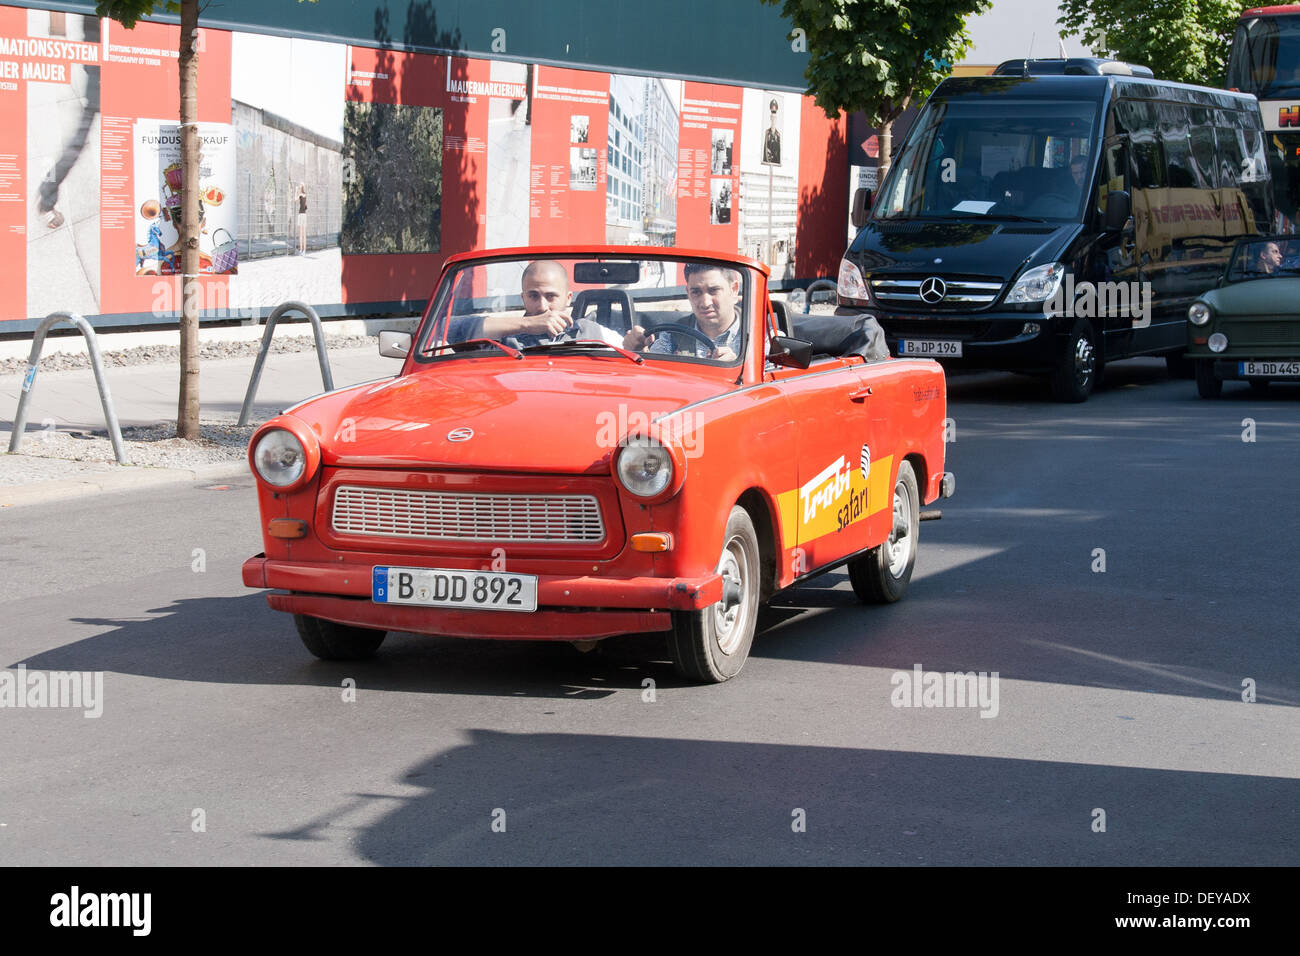 A trabant at Checkpoint Charlie Friedrichstrasse - Berlin, Germany Stock Photo